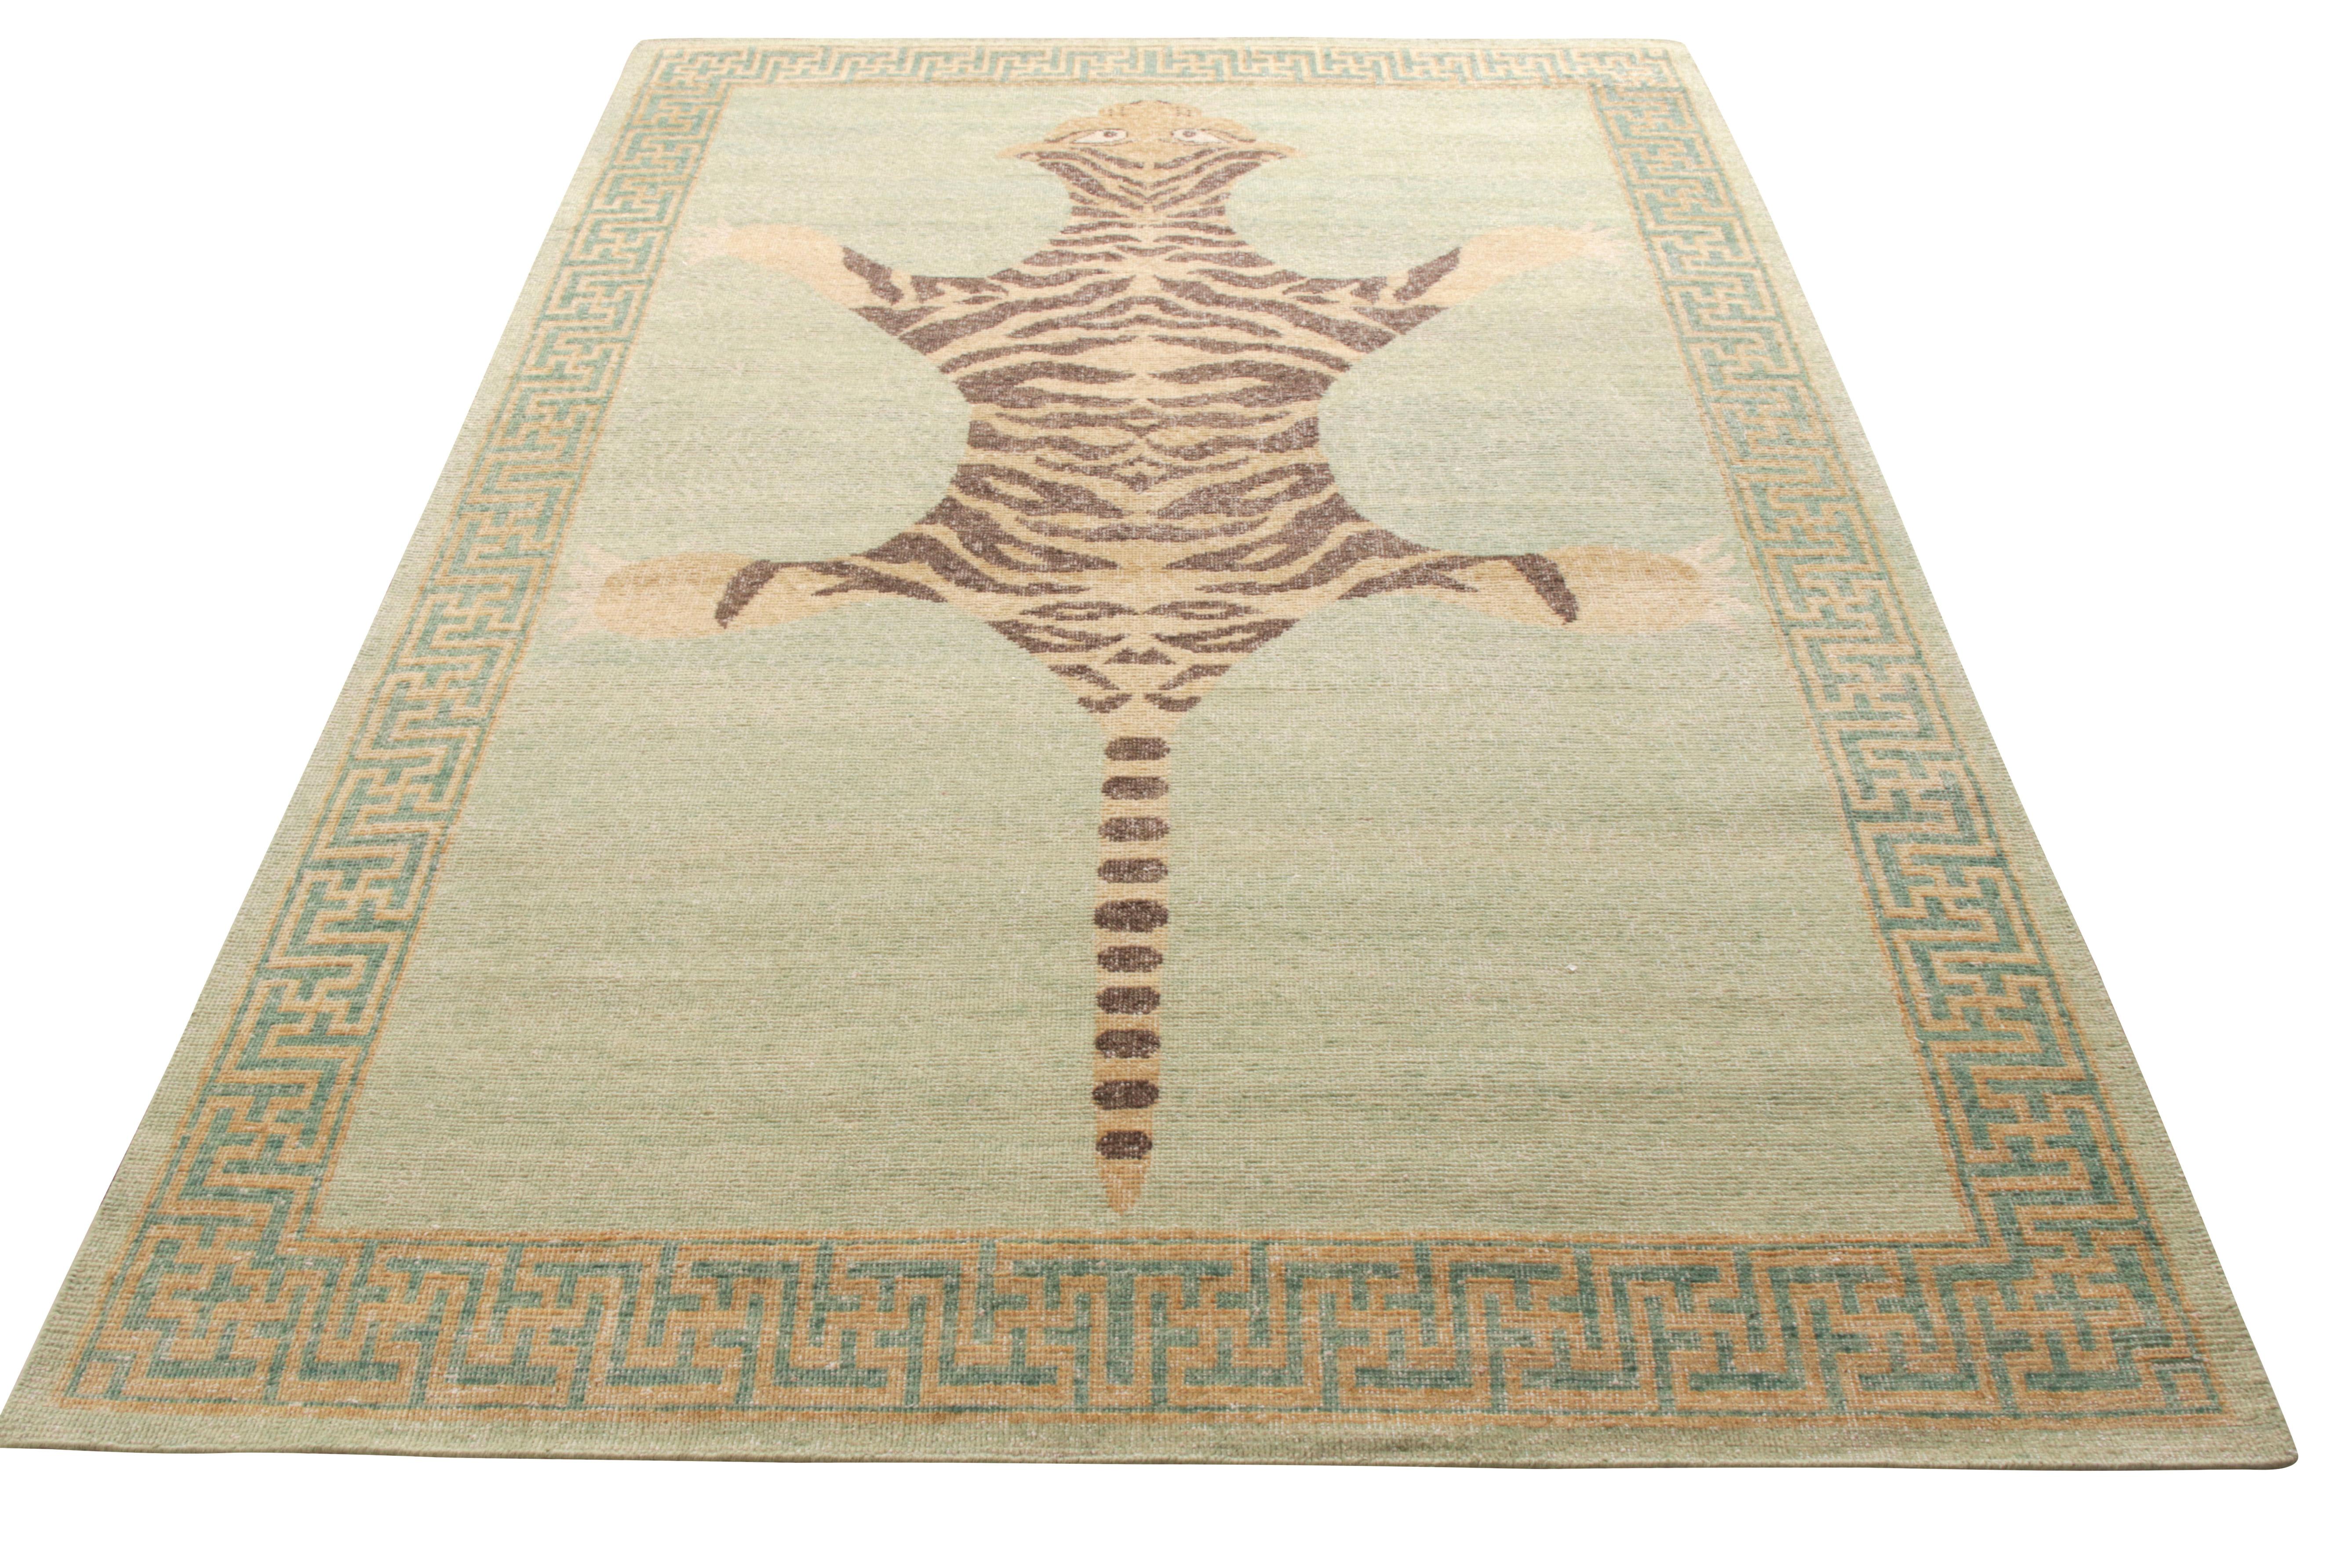 Hand knotted in wool, Rug & Kilim’s distressed take on classic Indian tiger styles joining its Homage Collection. A 6x9 ode imbibing a regal vibe with a pictorial representation of a tiger skin, flourishing across the length in clean and defined